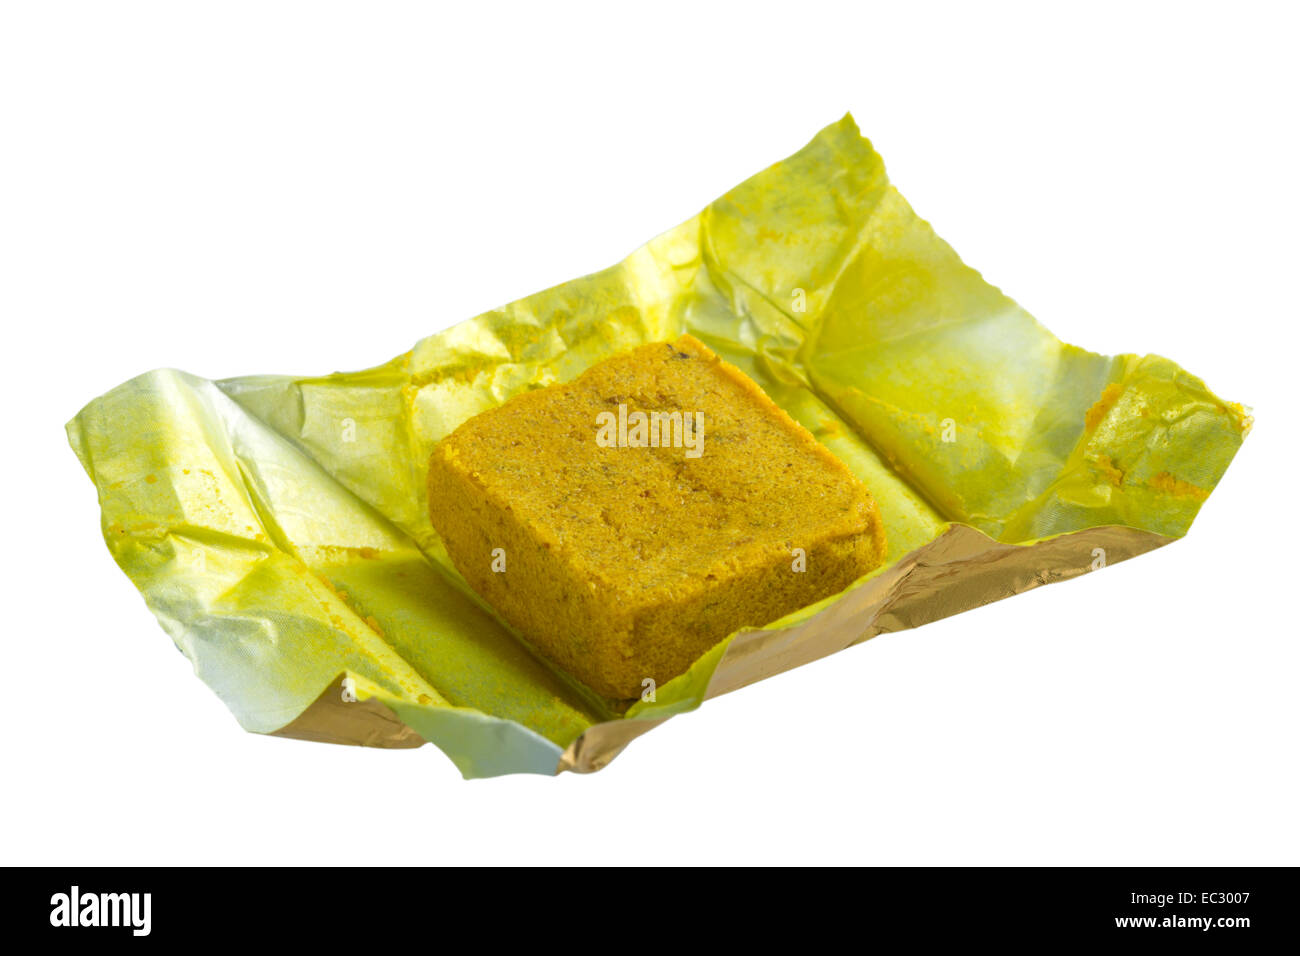 Concentrates chicken flavor bouillon cube isolated over white background with clipping path Stock Photo